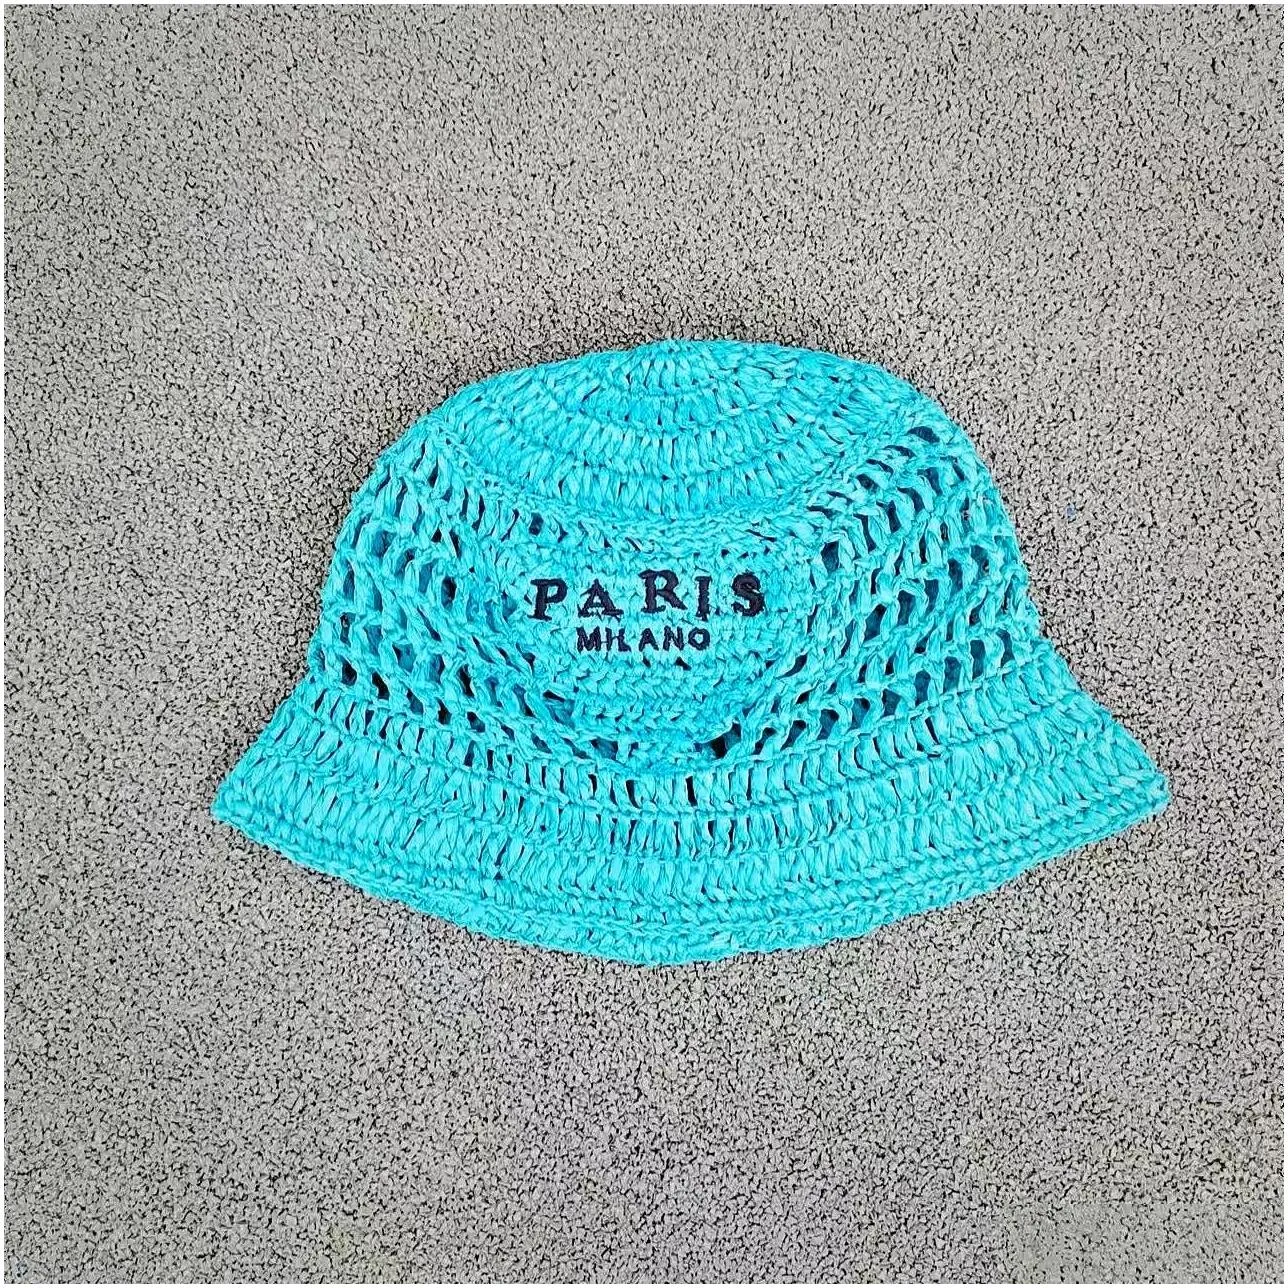 Wide Brim Hats Fashion Designer Bucket Hat Summer Tide St Shade Protection Beach Hand Woven Fishermans Cap Drop Delivery Accessories H Otkv2